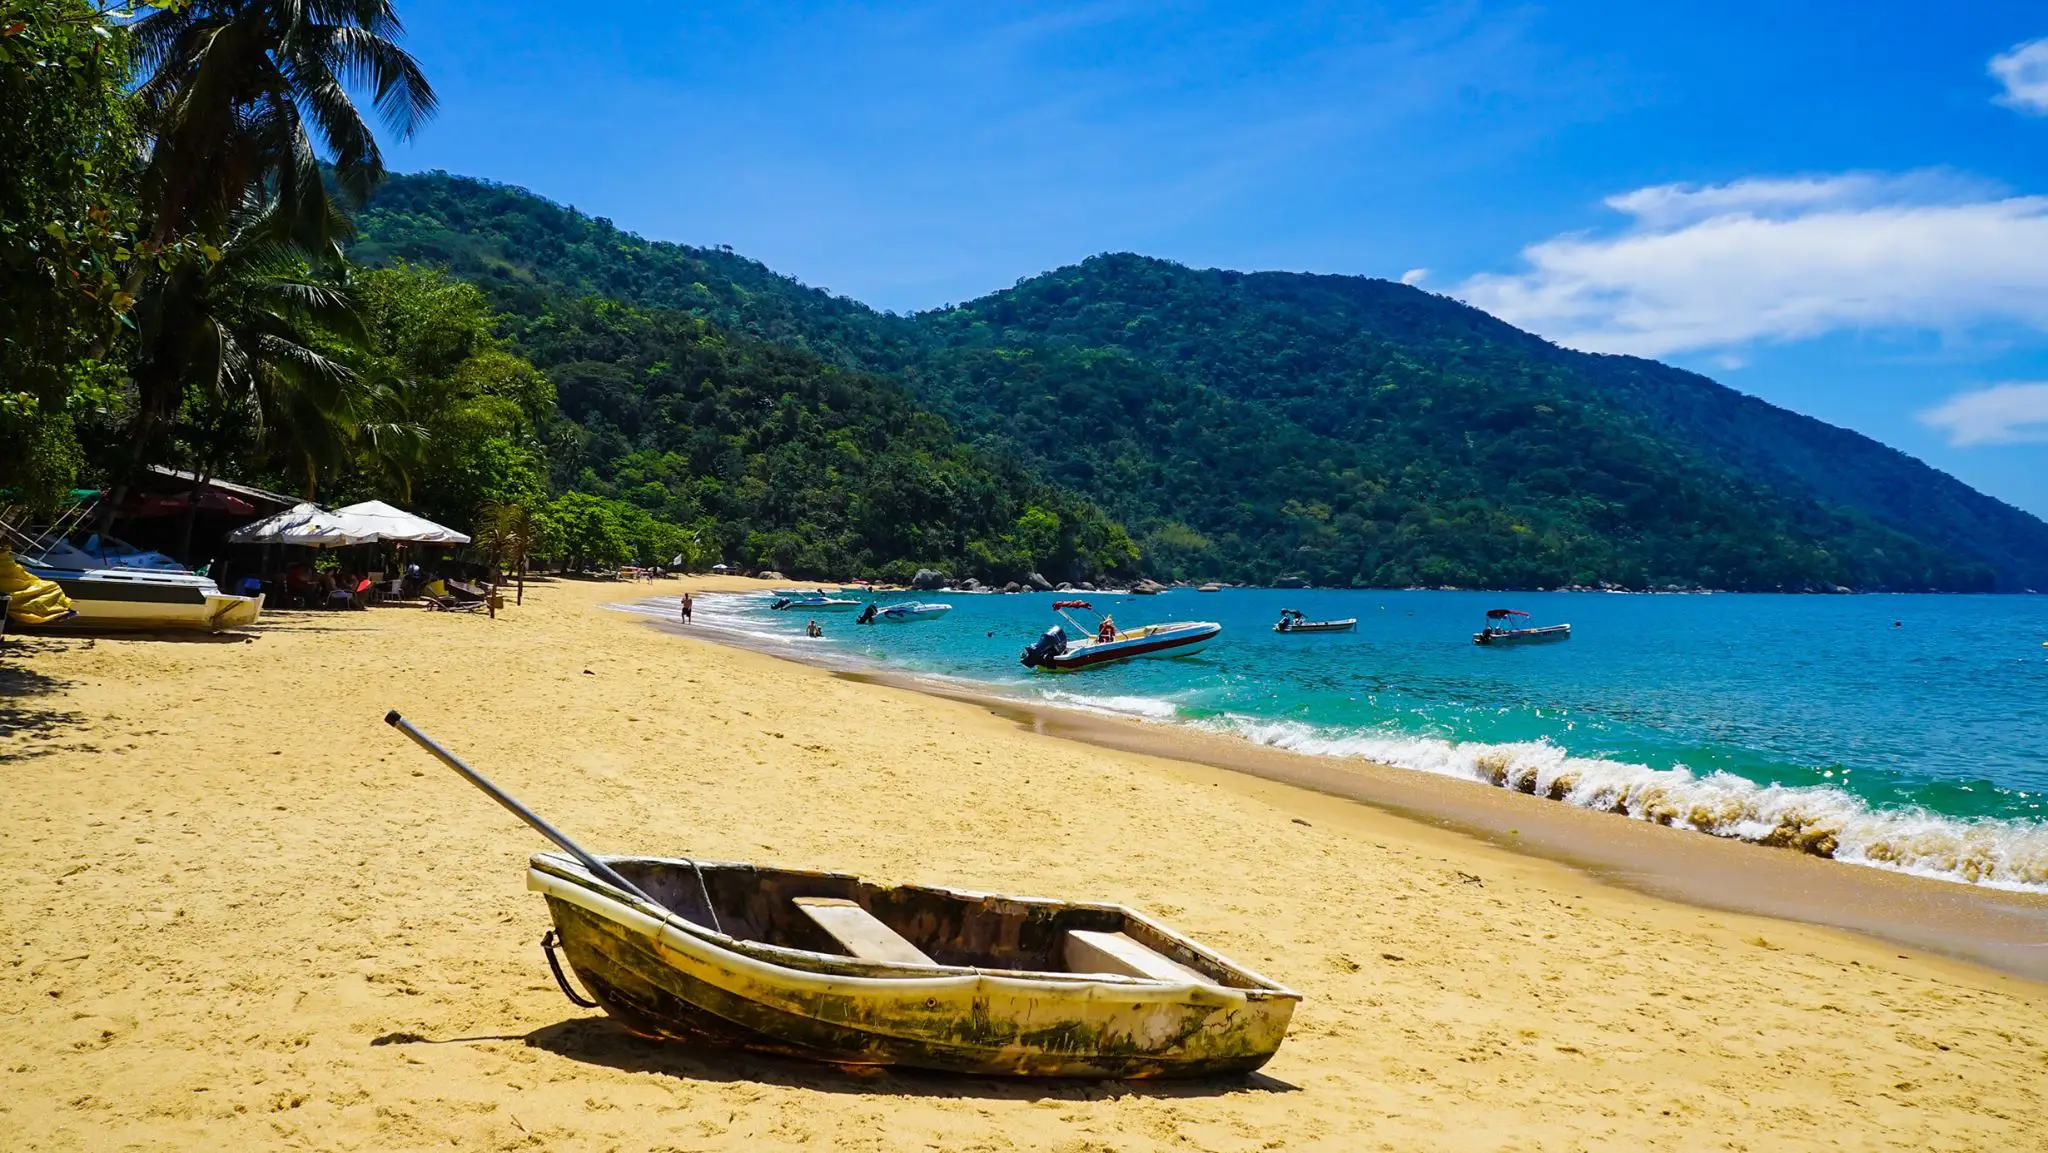 Discovering Brazil: Things to Do In Ilha Grande Island